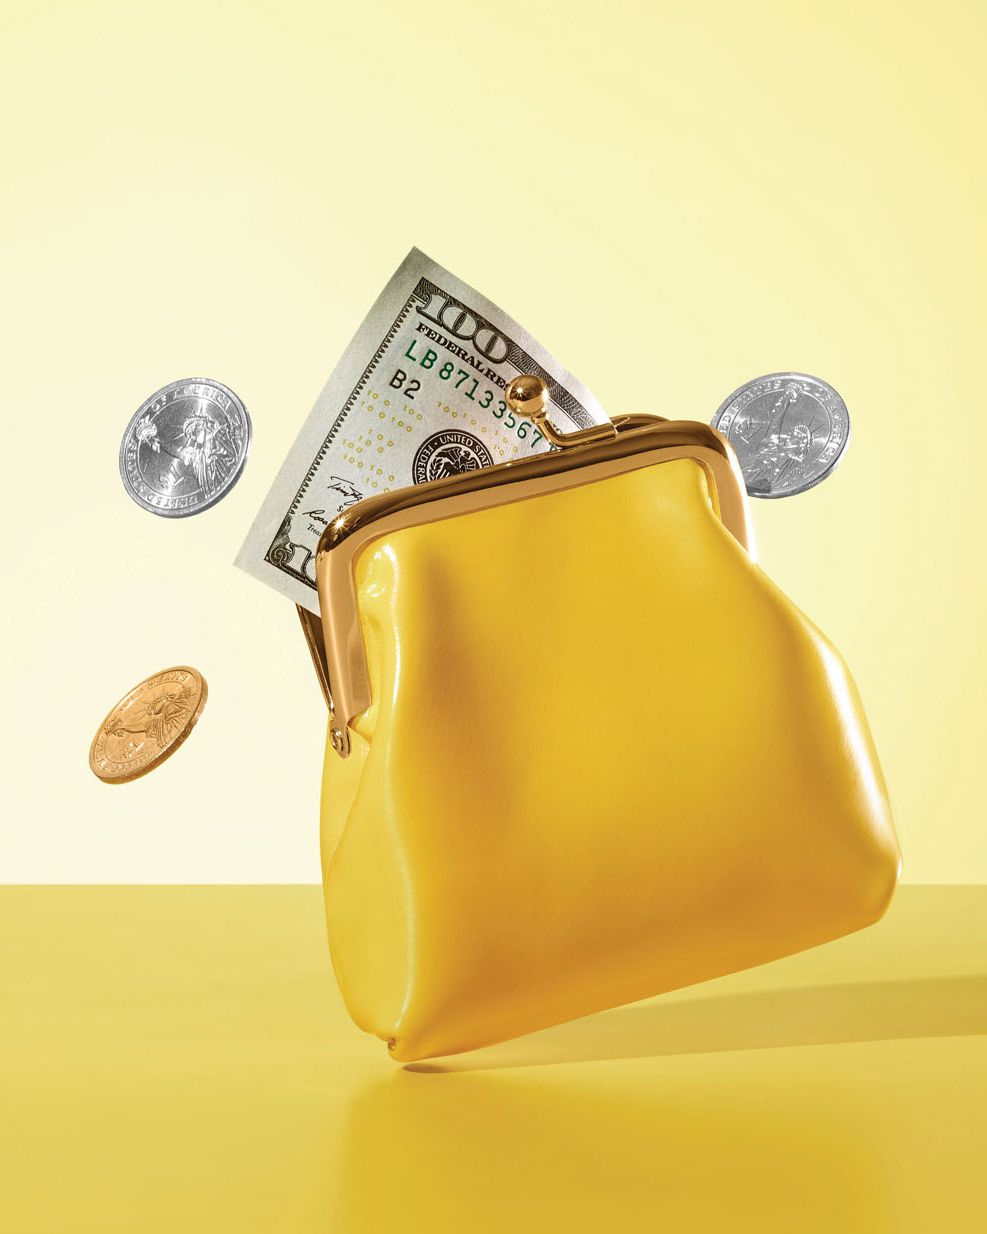 yellow coin purse with cash and coins coming out of it